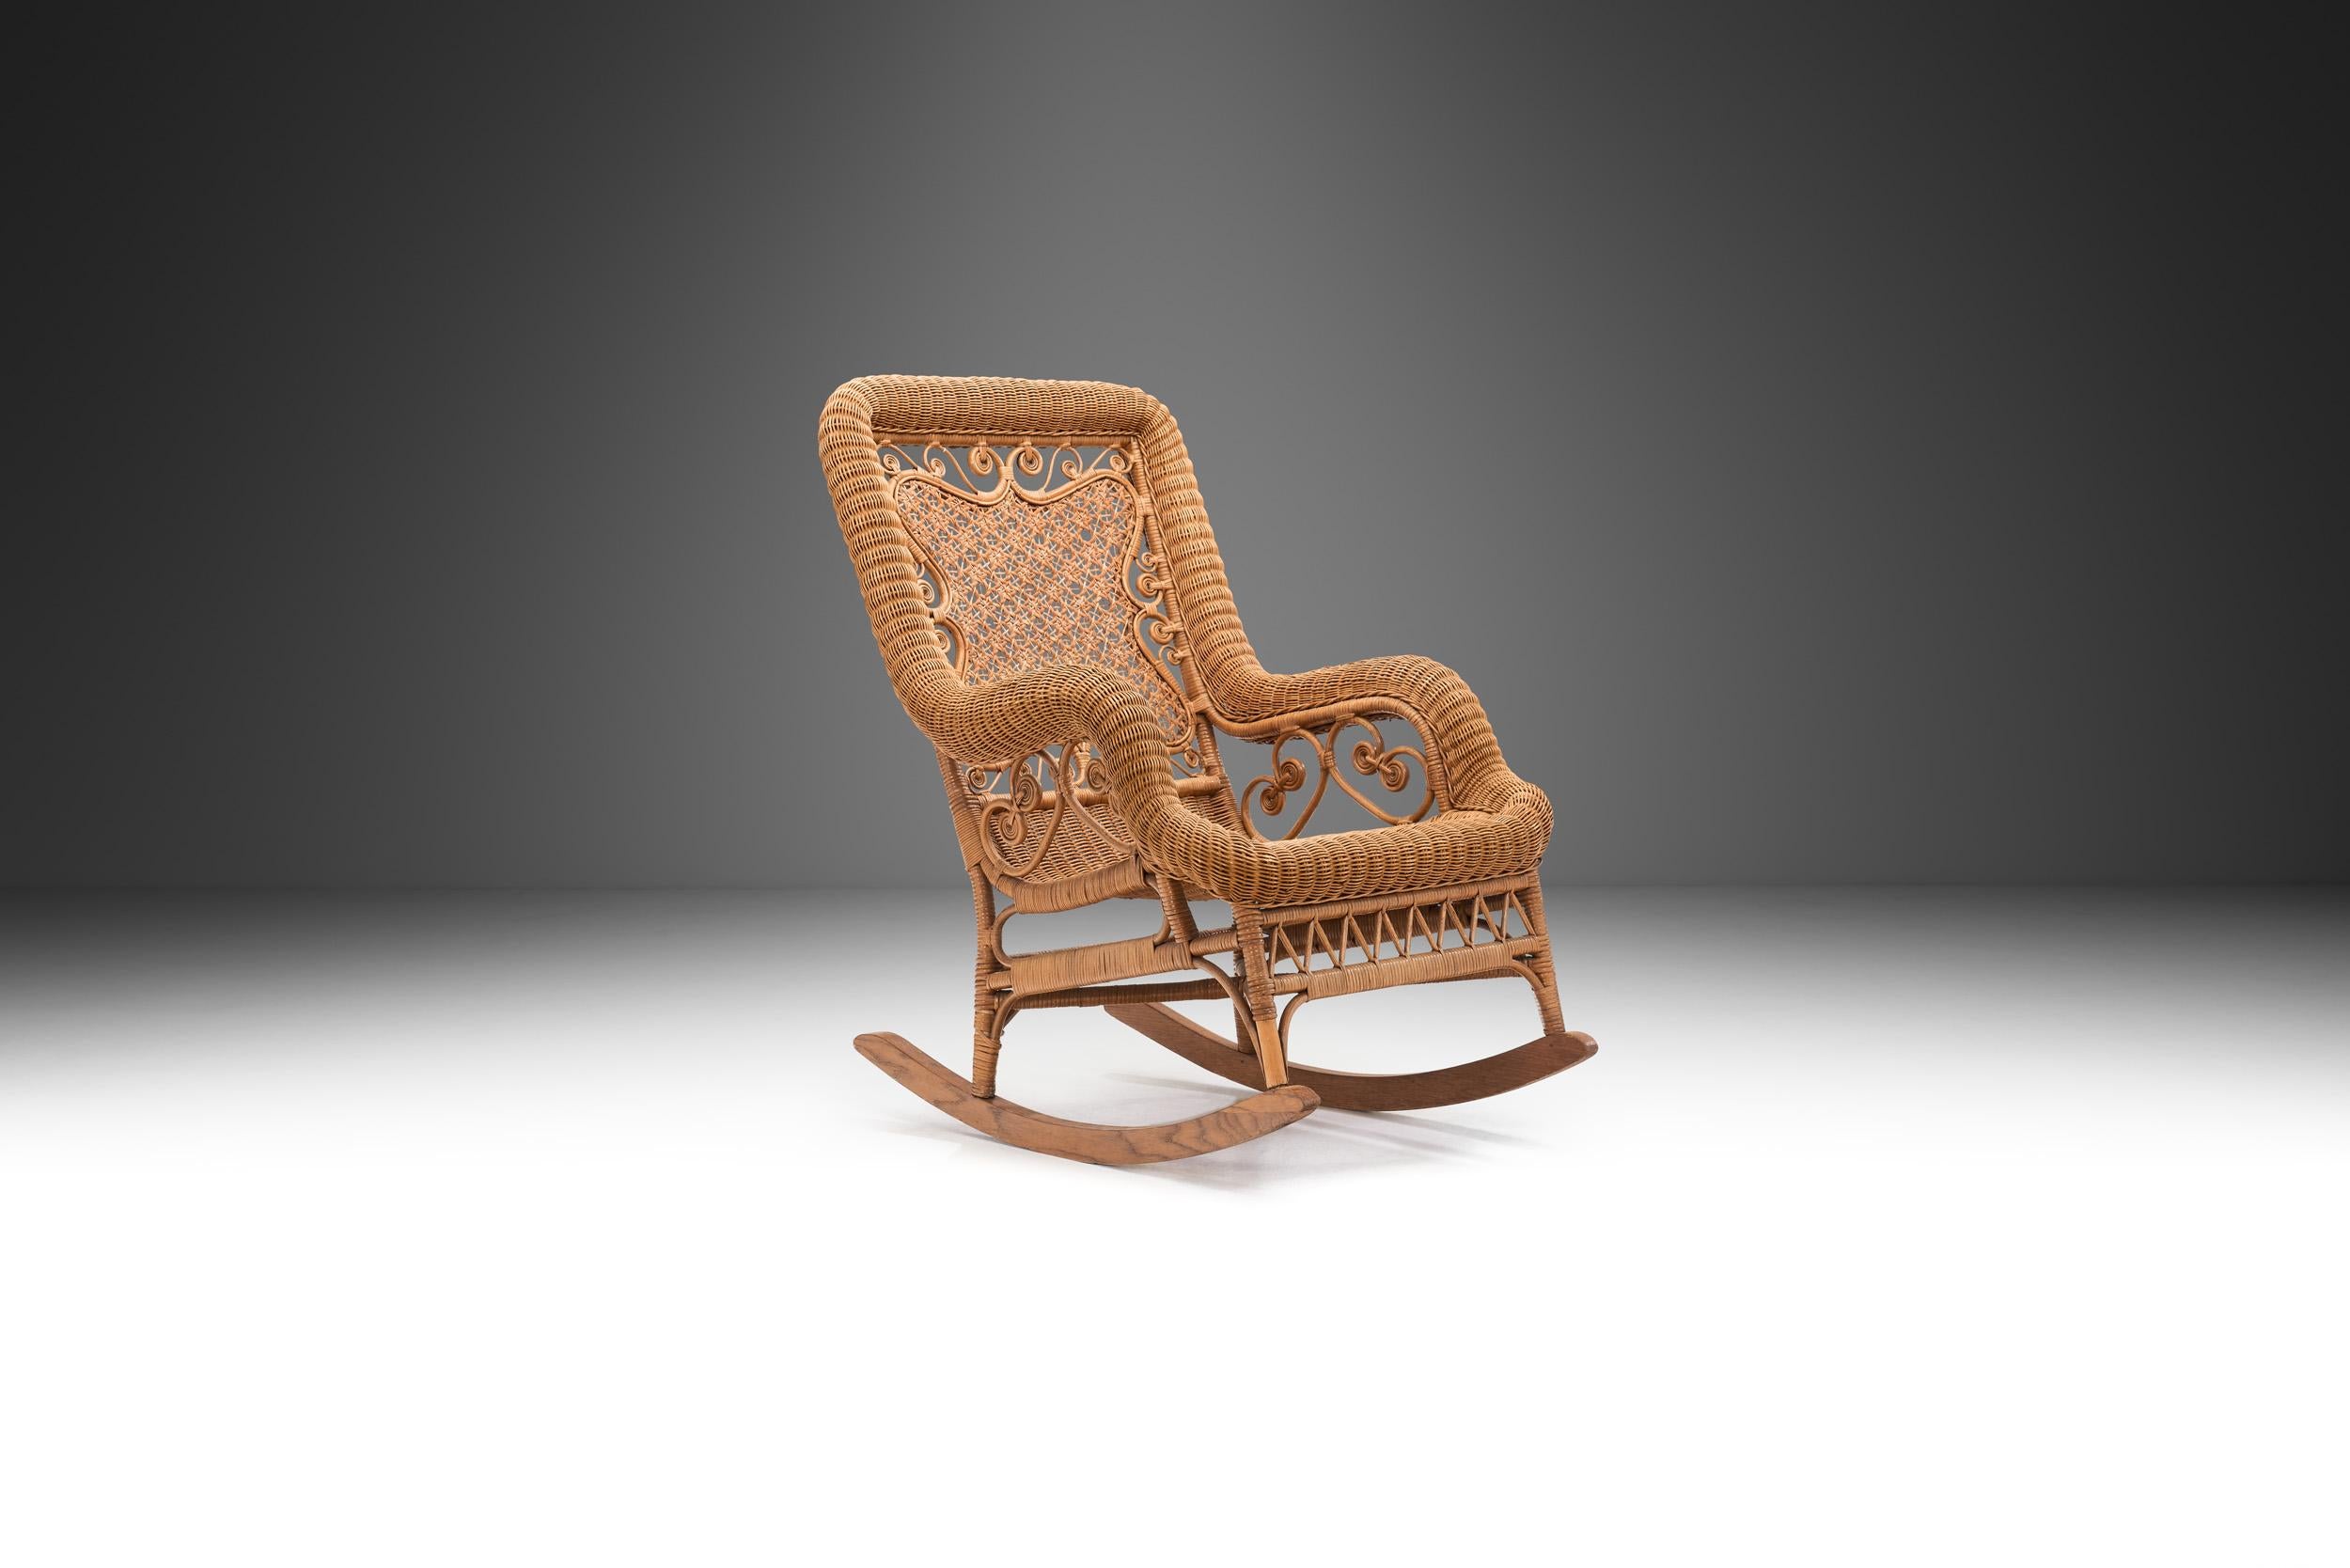 European Bamboo and Rattan Rocking Chair, Europe First Half of the 20th Century